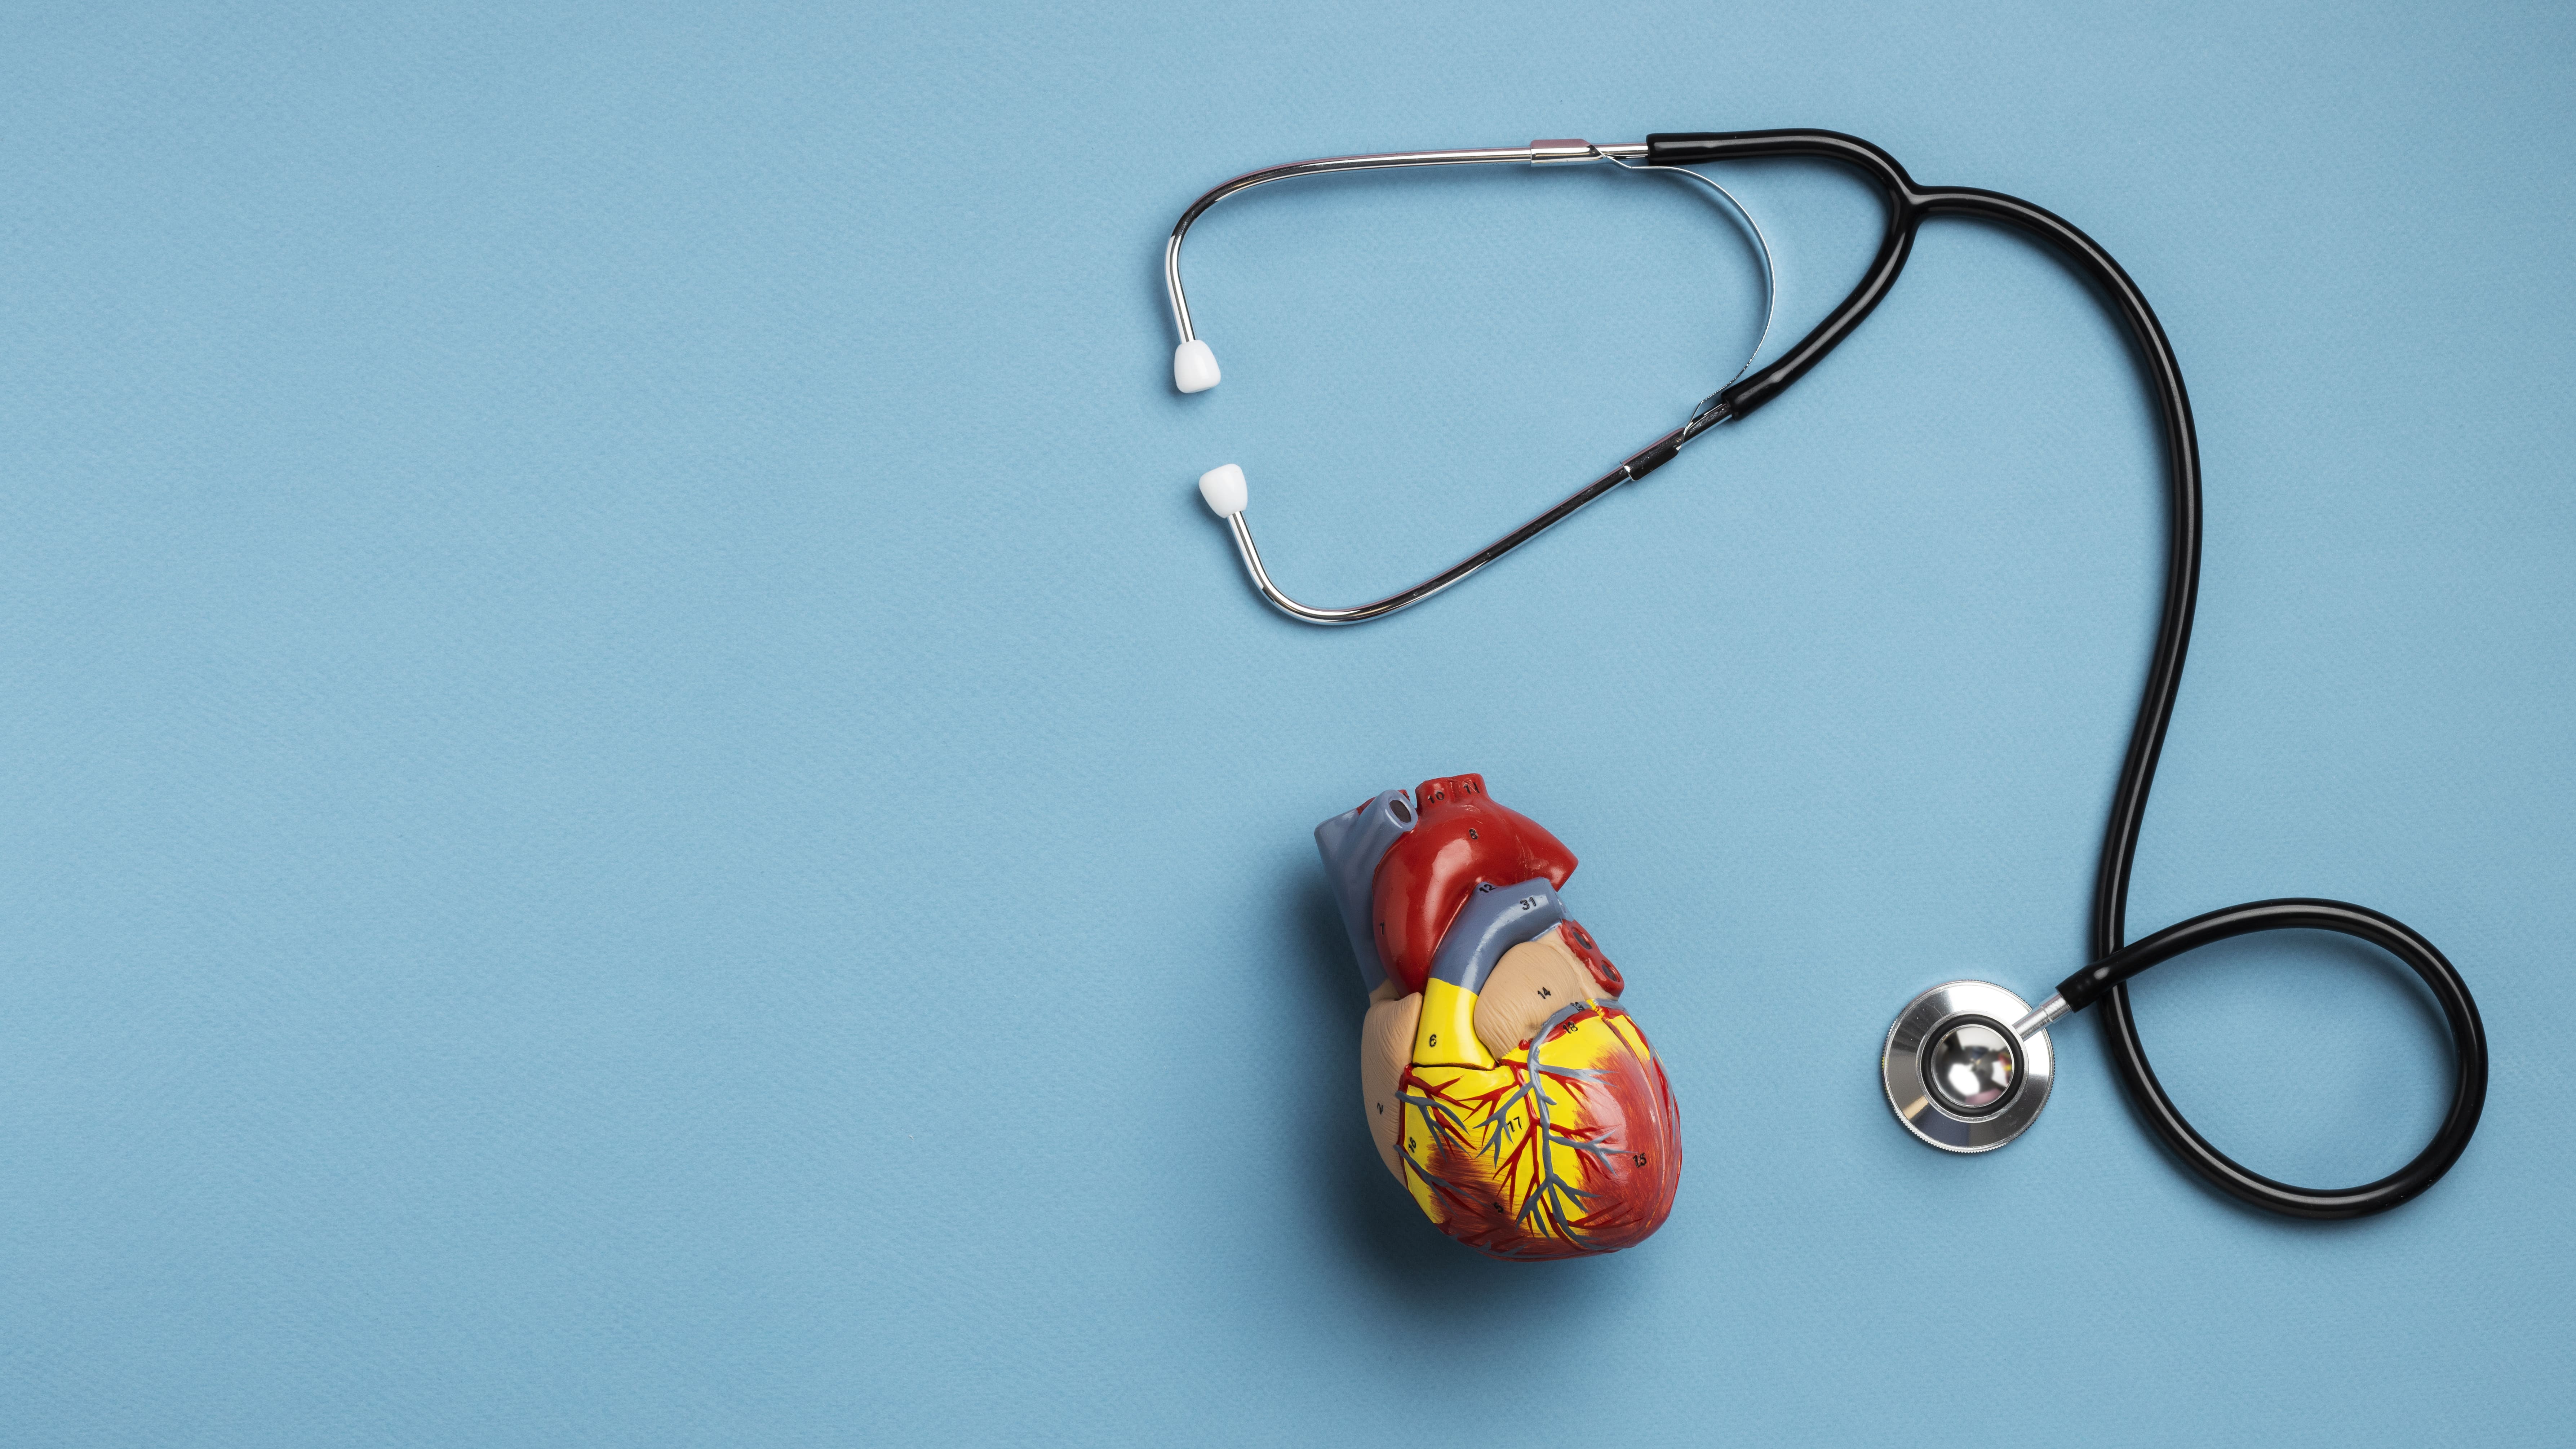 Heart Thickening: Are You At Risk?